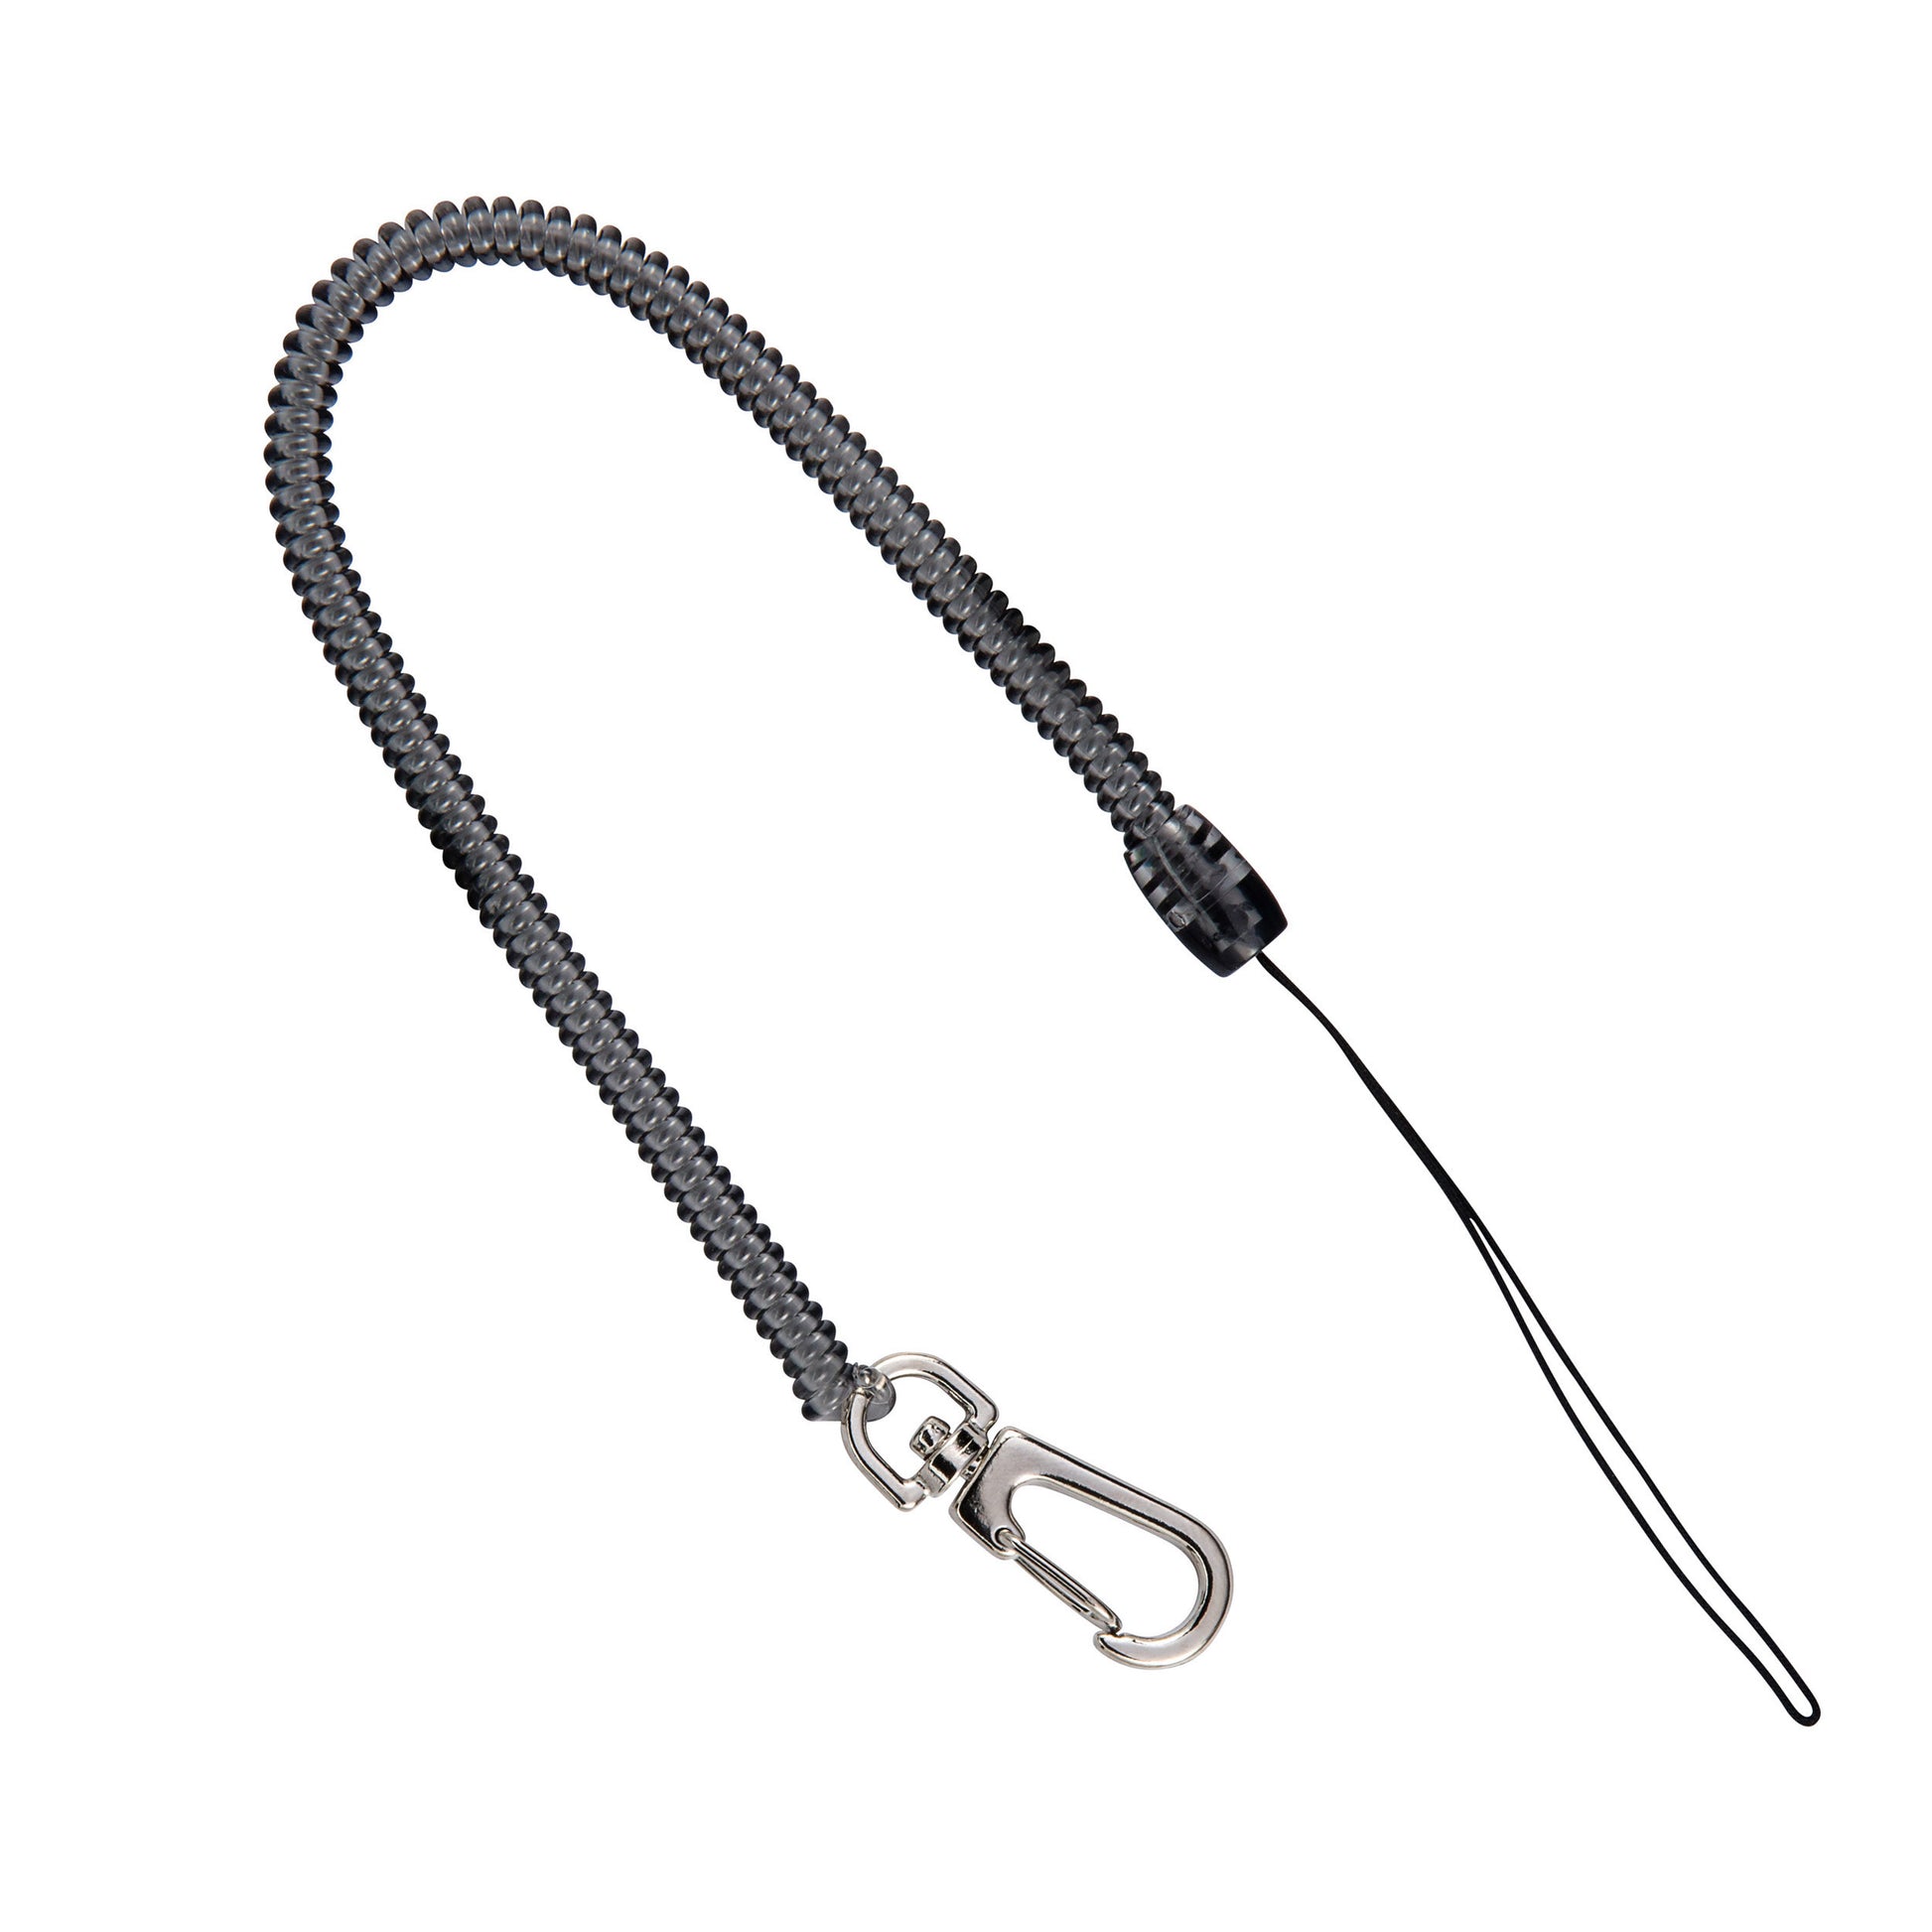 CL-36 PHC Coil Lanyard with Swivel Connector (Pack of 10) - DaltonSafety